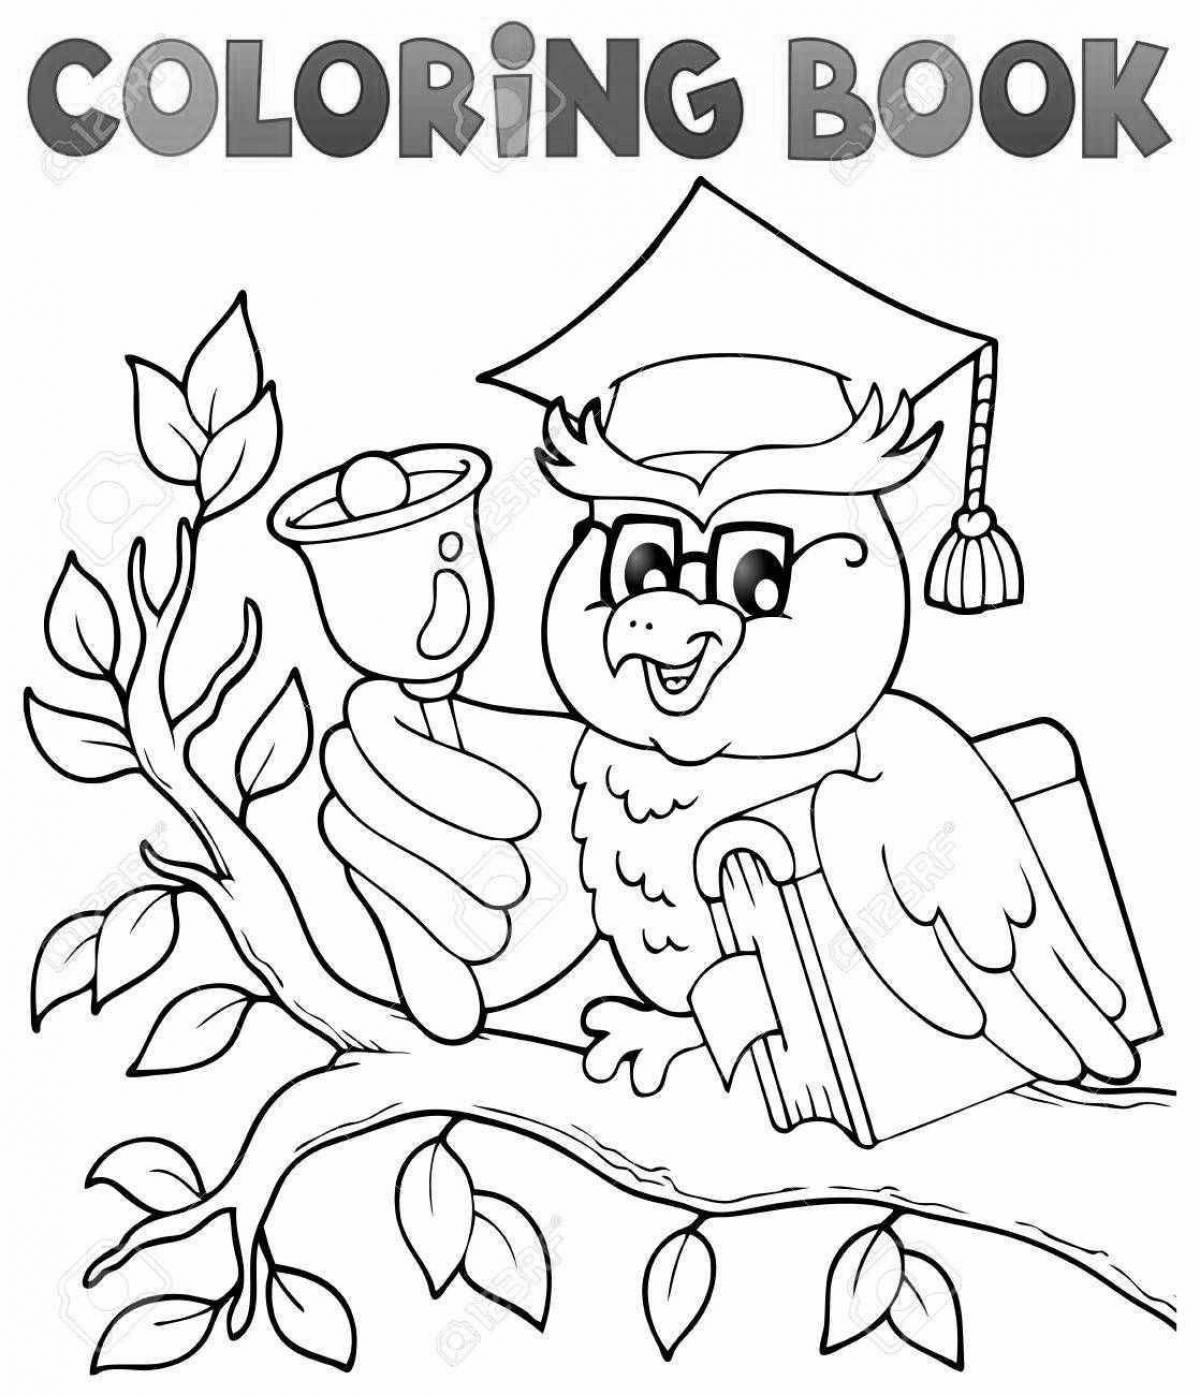 Generous coloring owl with books